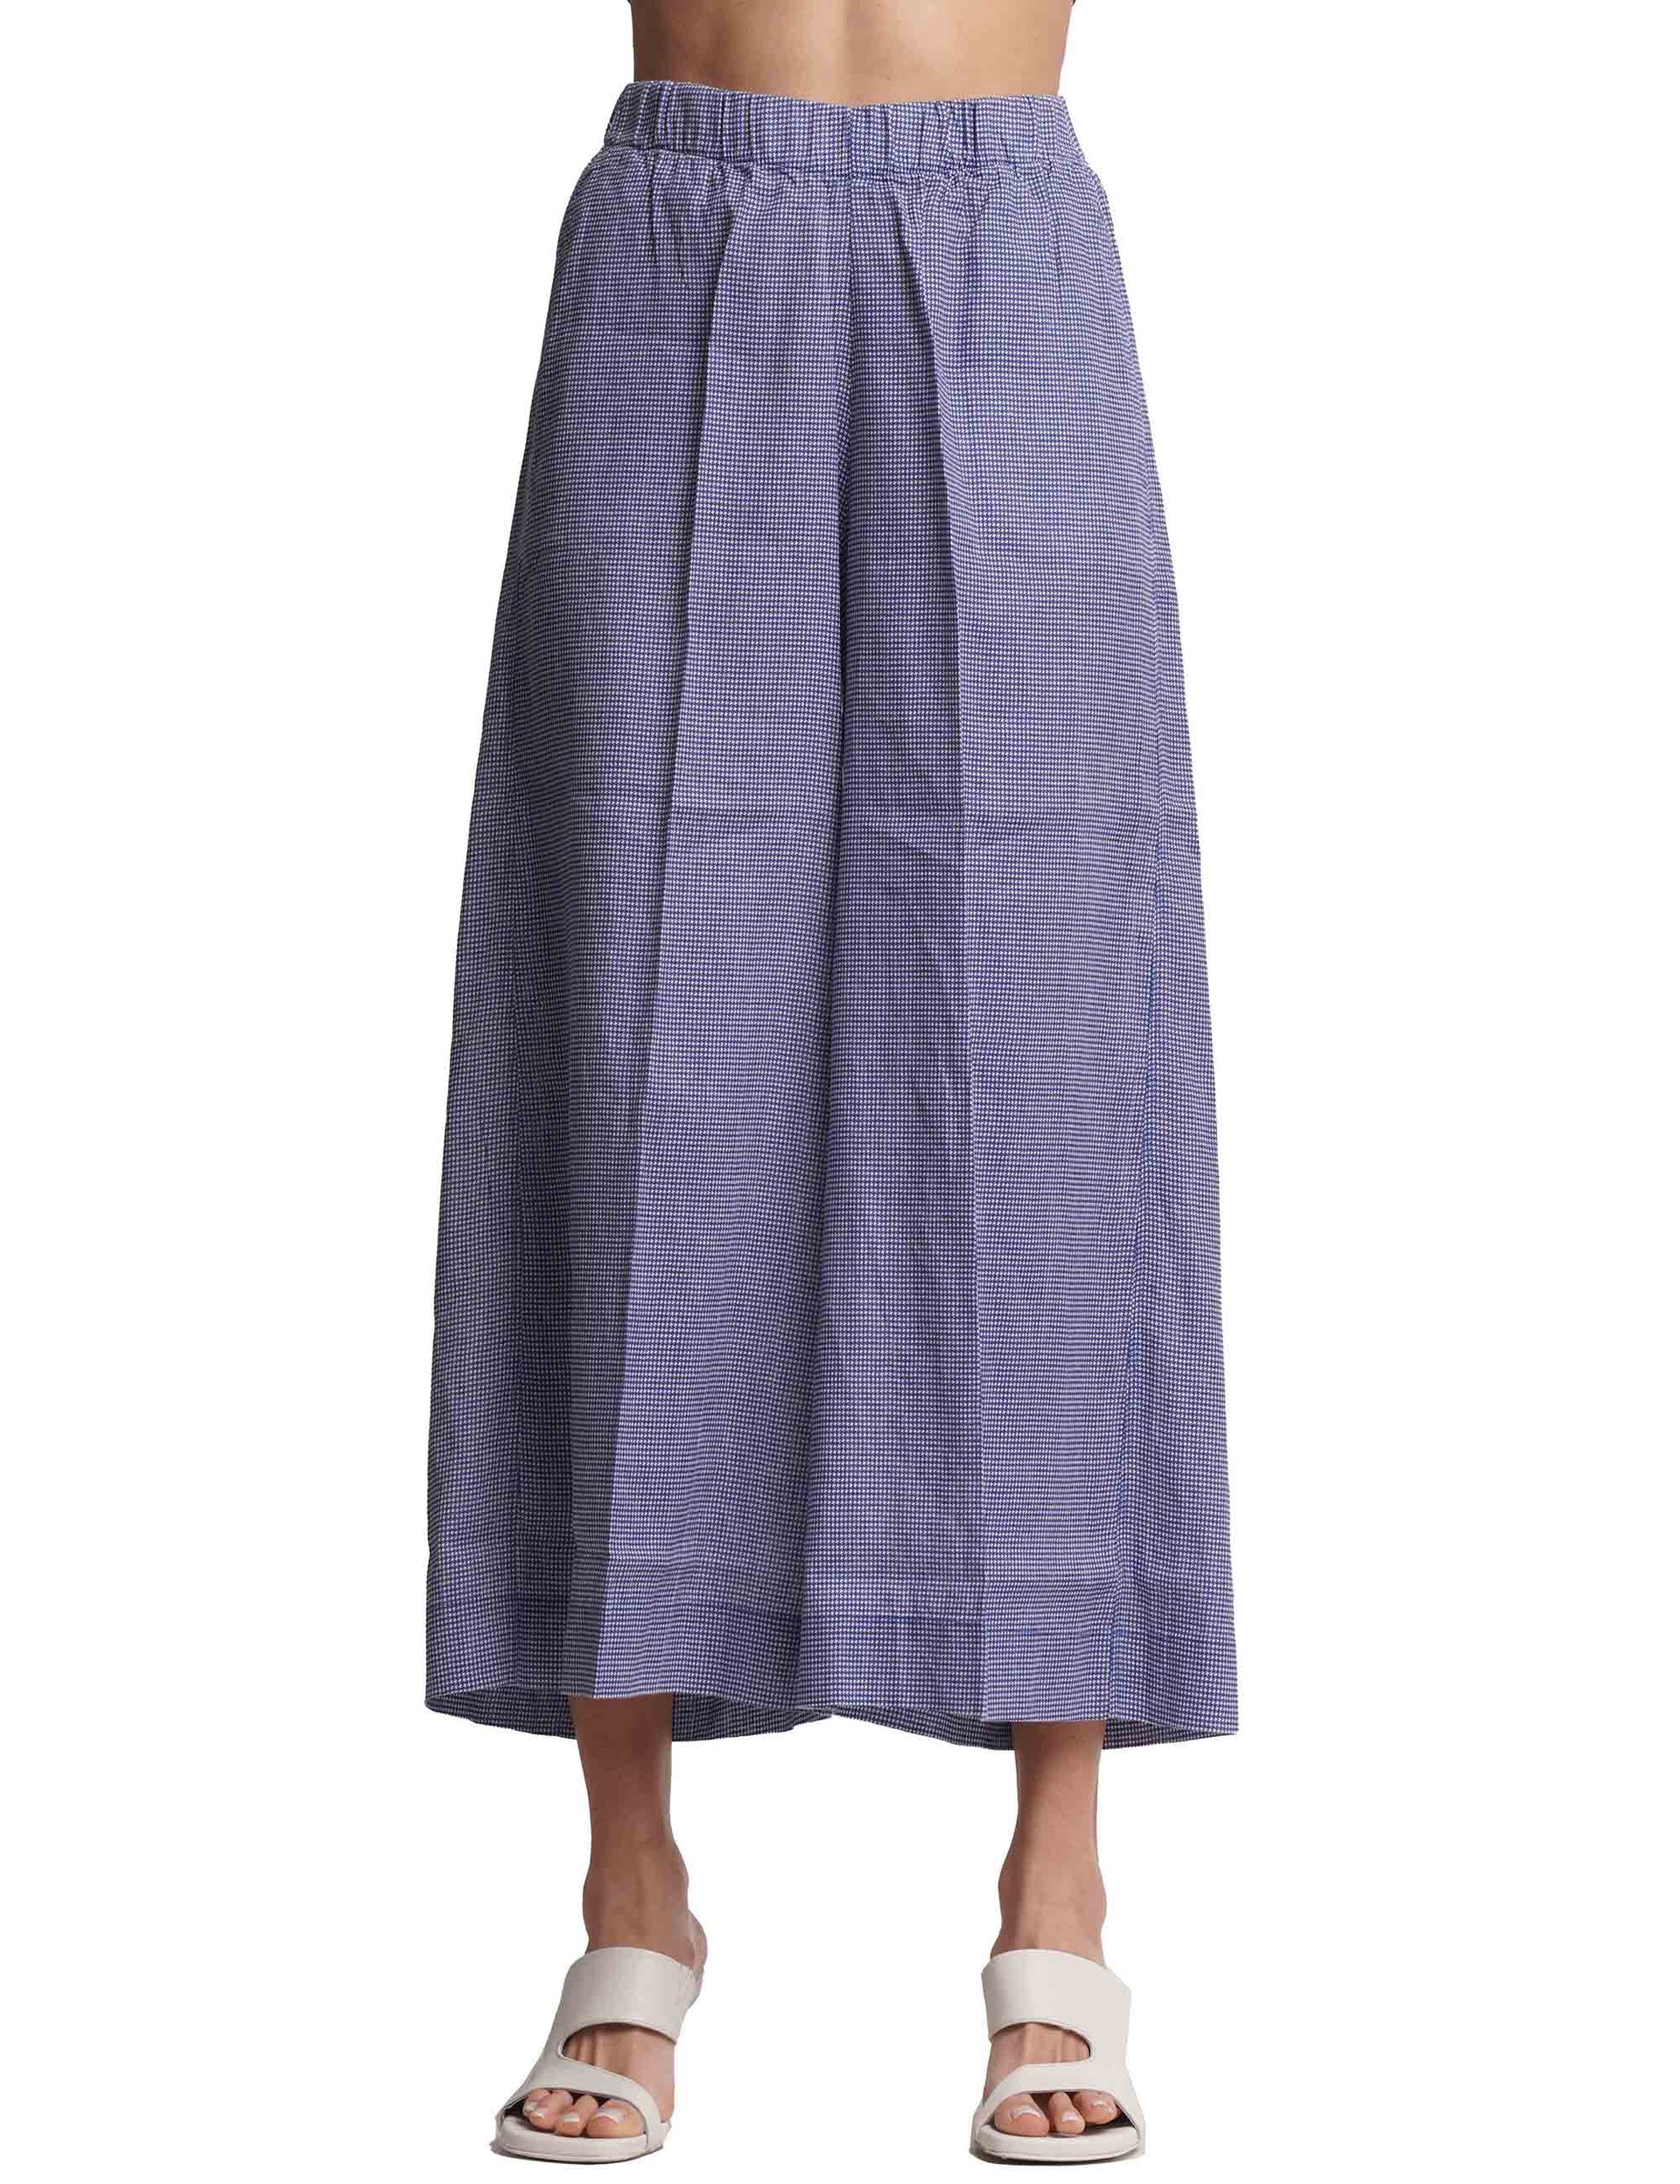 Women's wide-leg trousers in pure blue linen with elastic waist